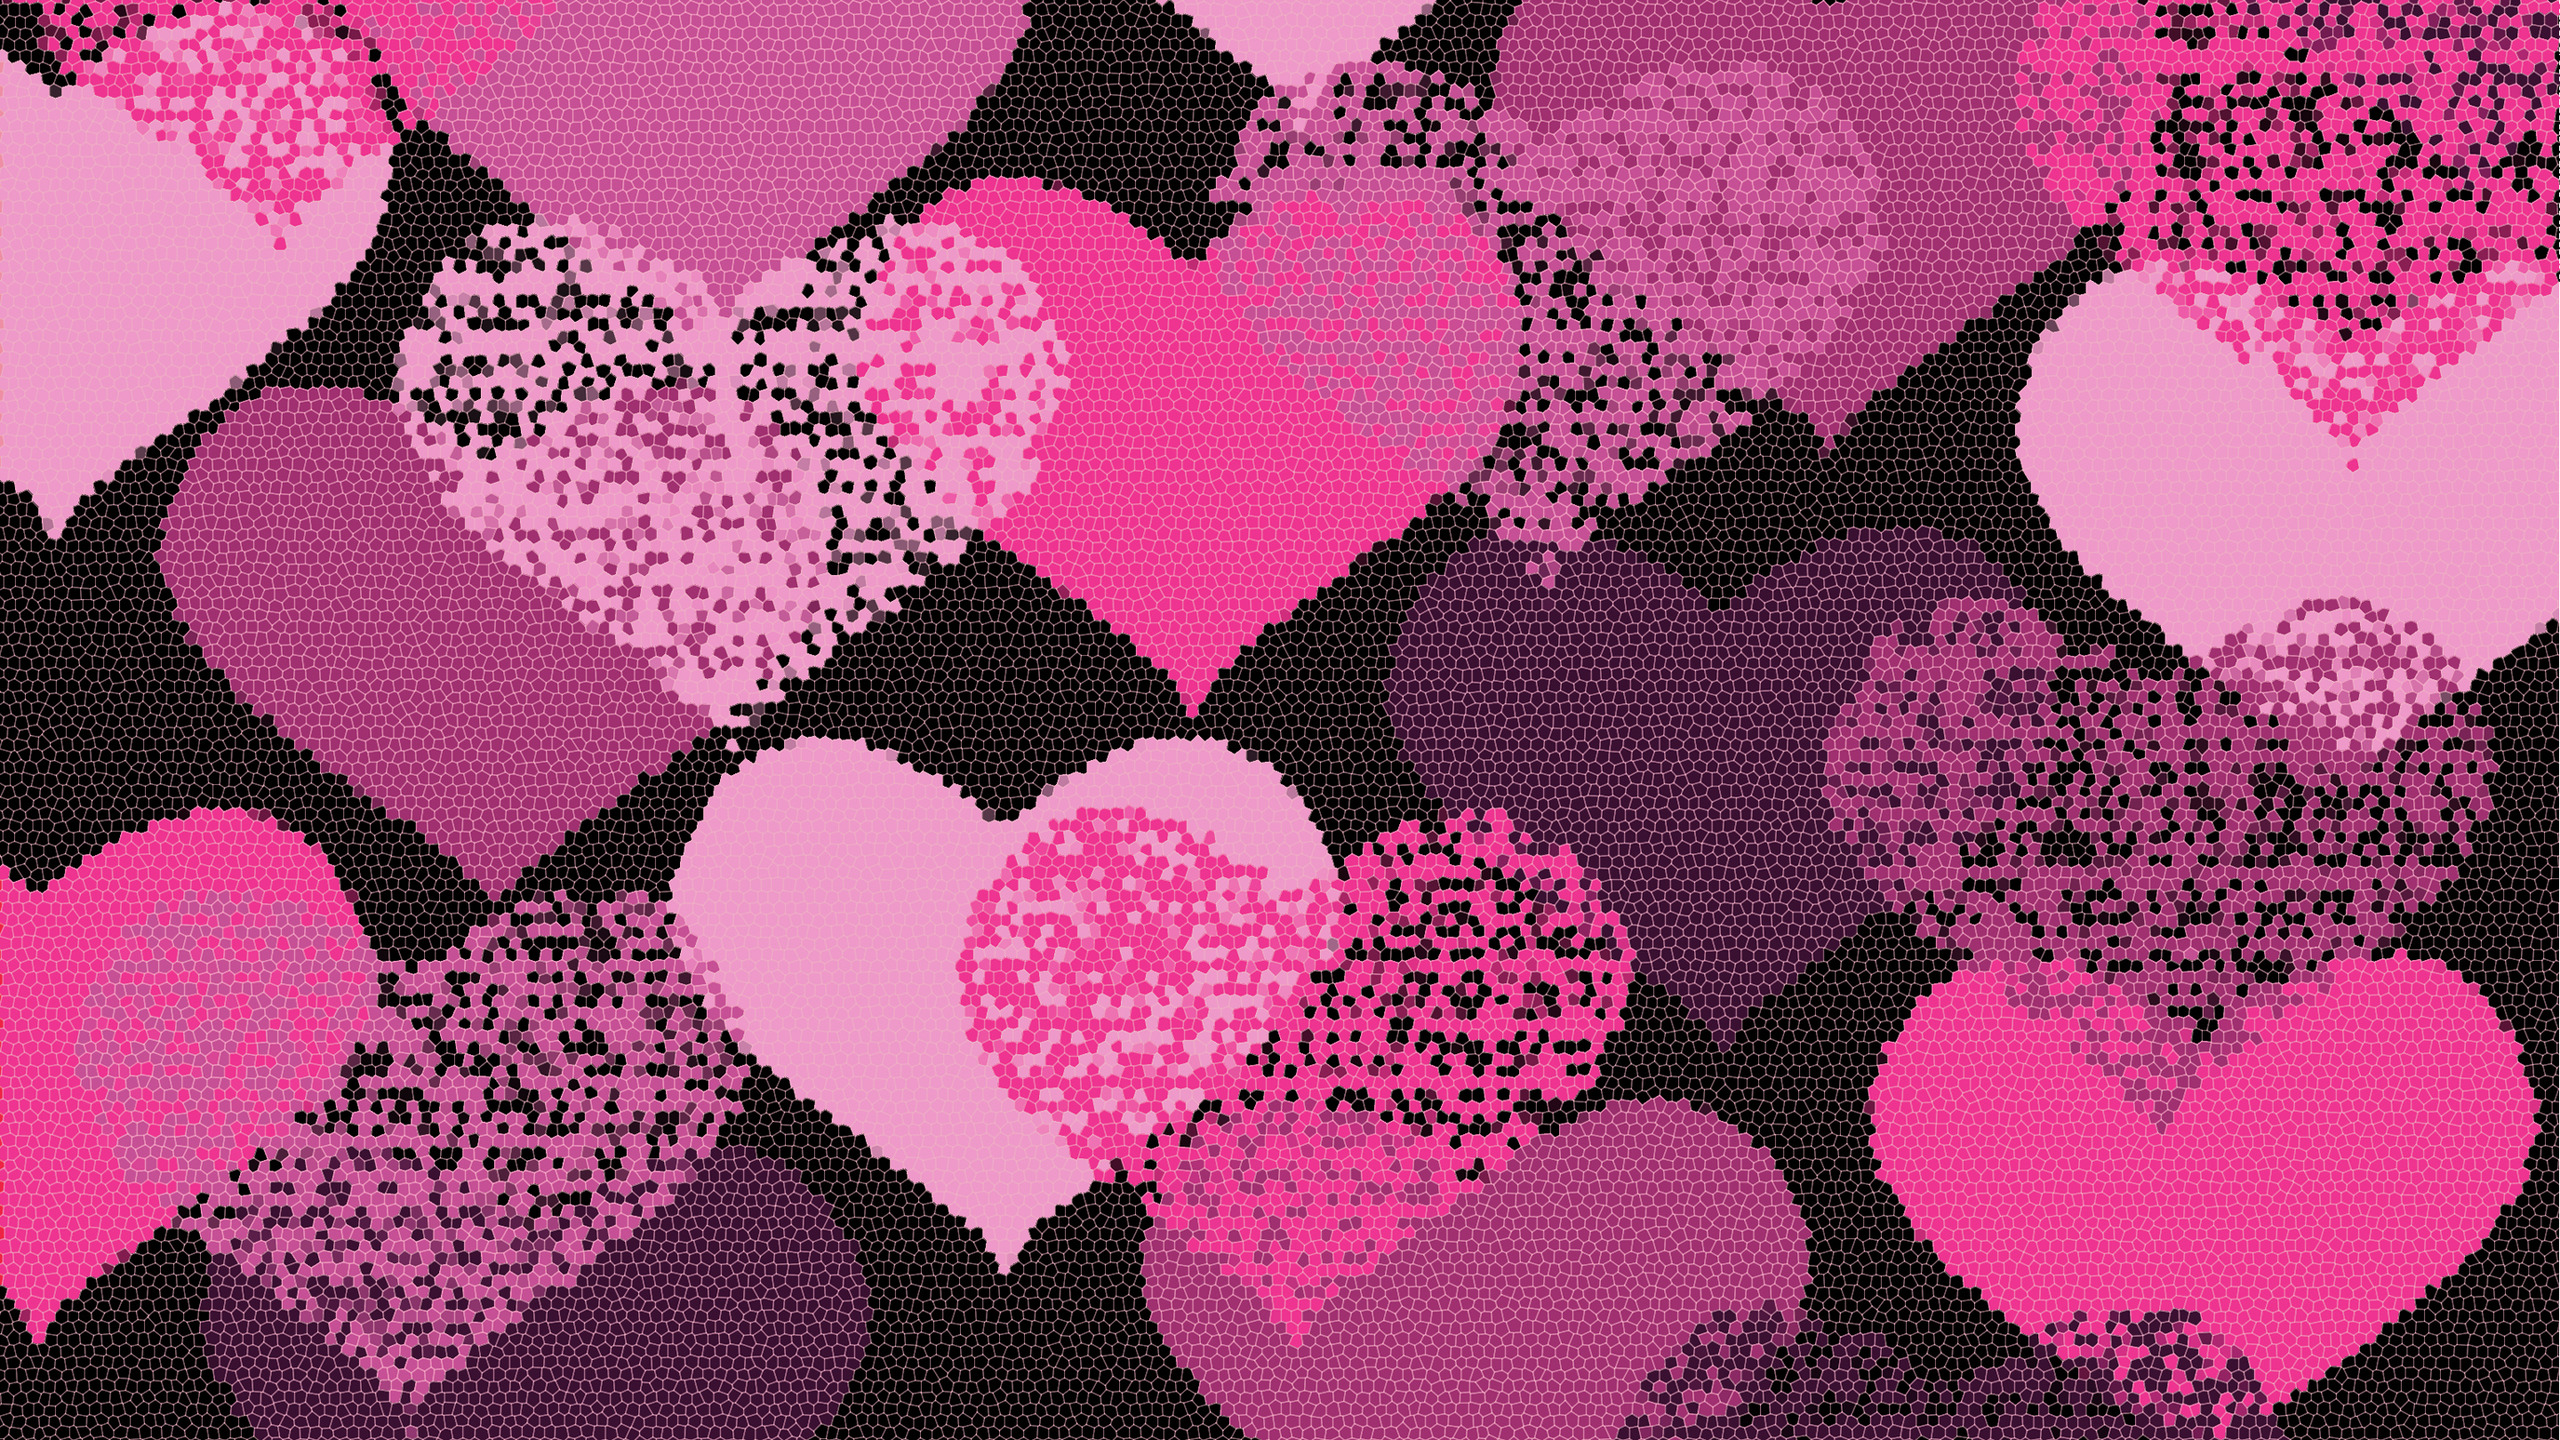 Hearts Wallpapers